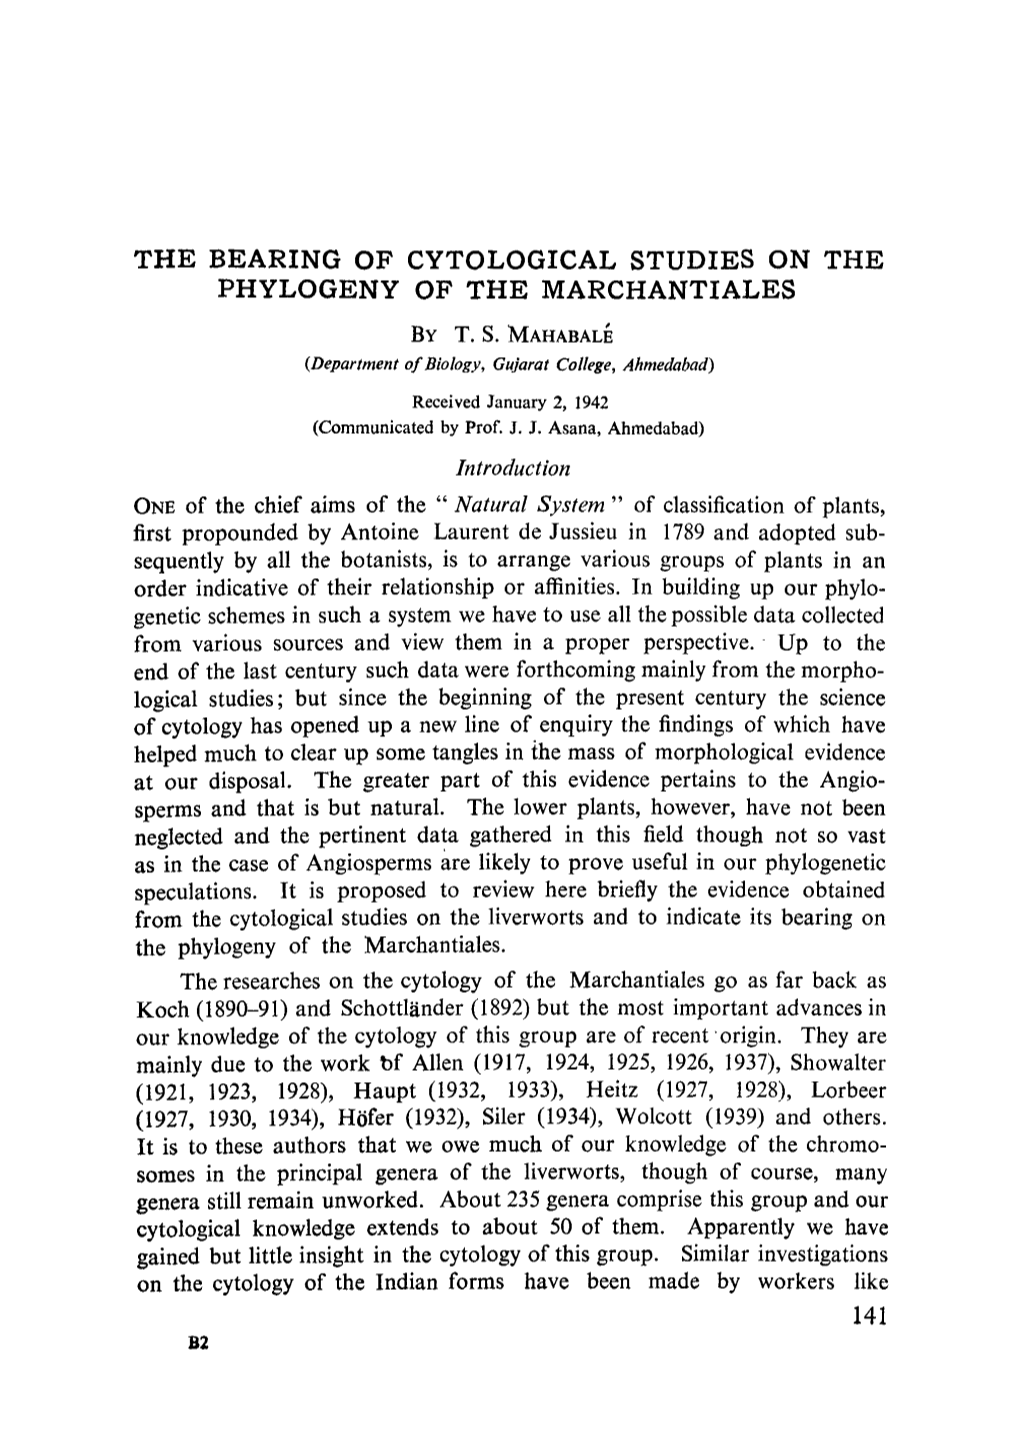 The Bearing of Cytological Studies on the Phylogeny of the Marchantiales by T.S